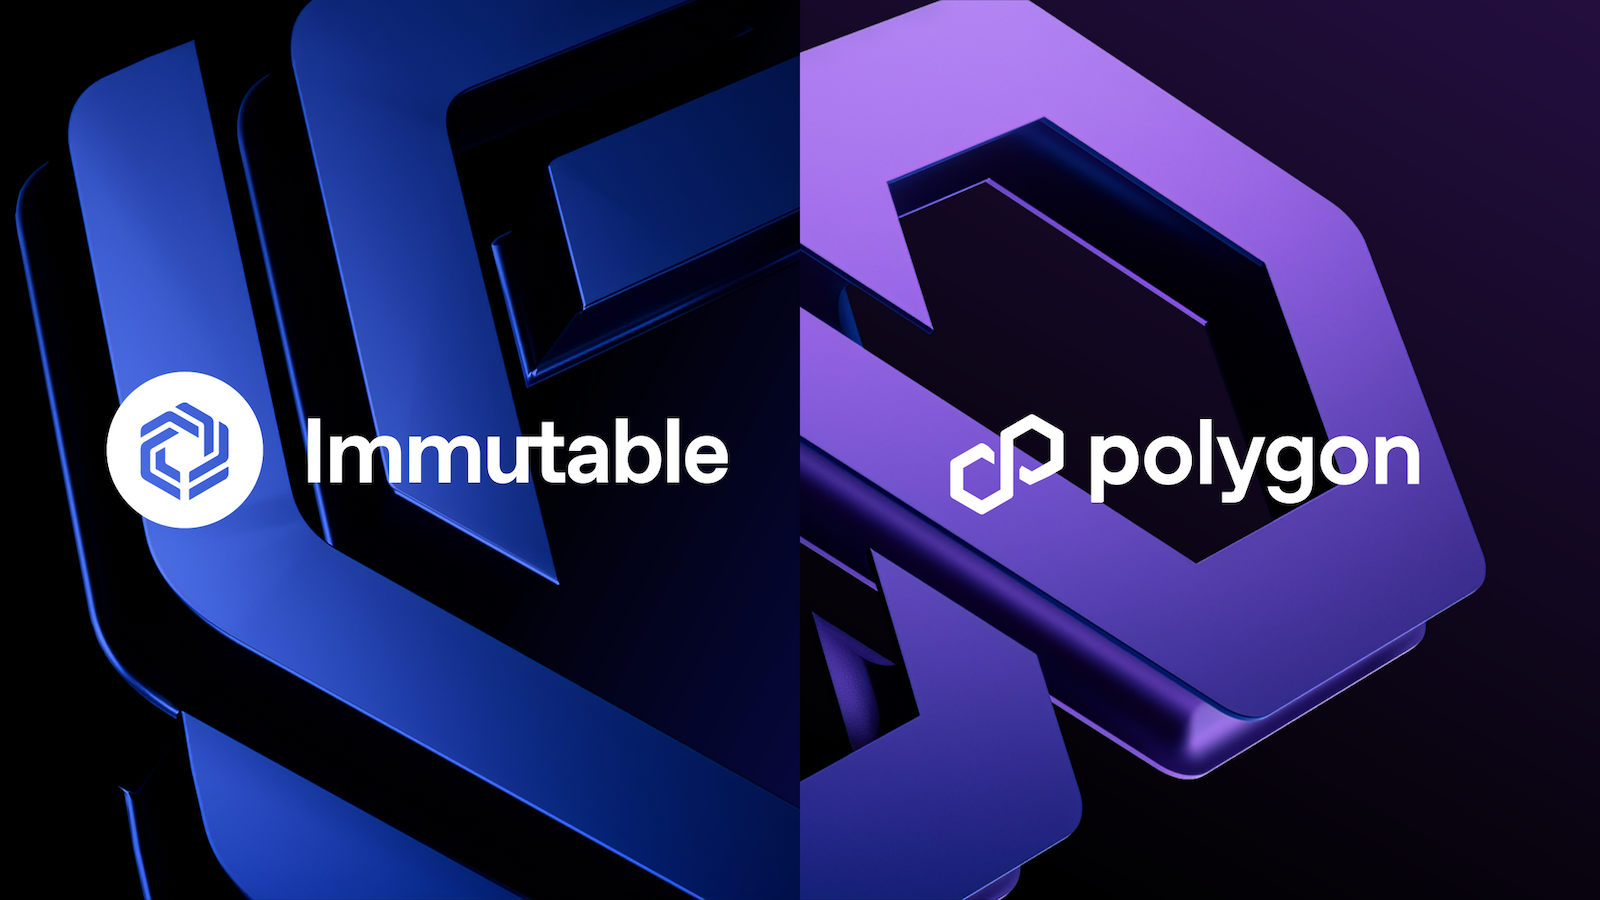 What An Immutable and Polygon Labs Partnership Means For Web3 Gaming